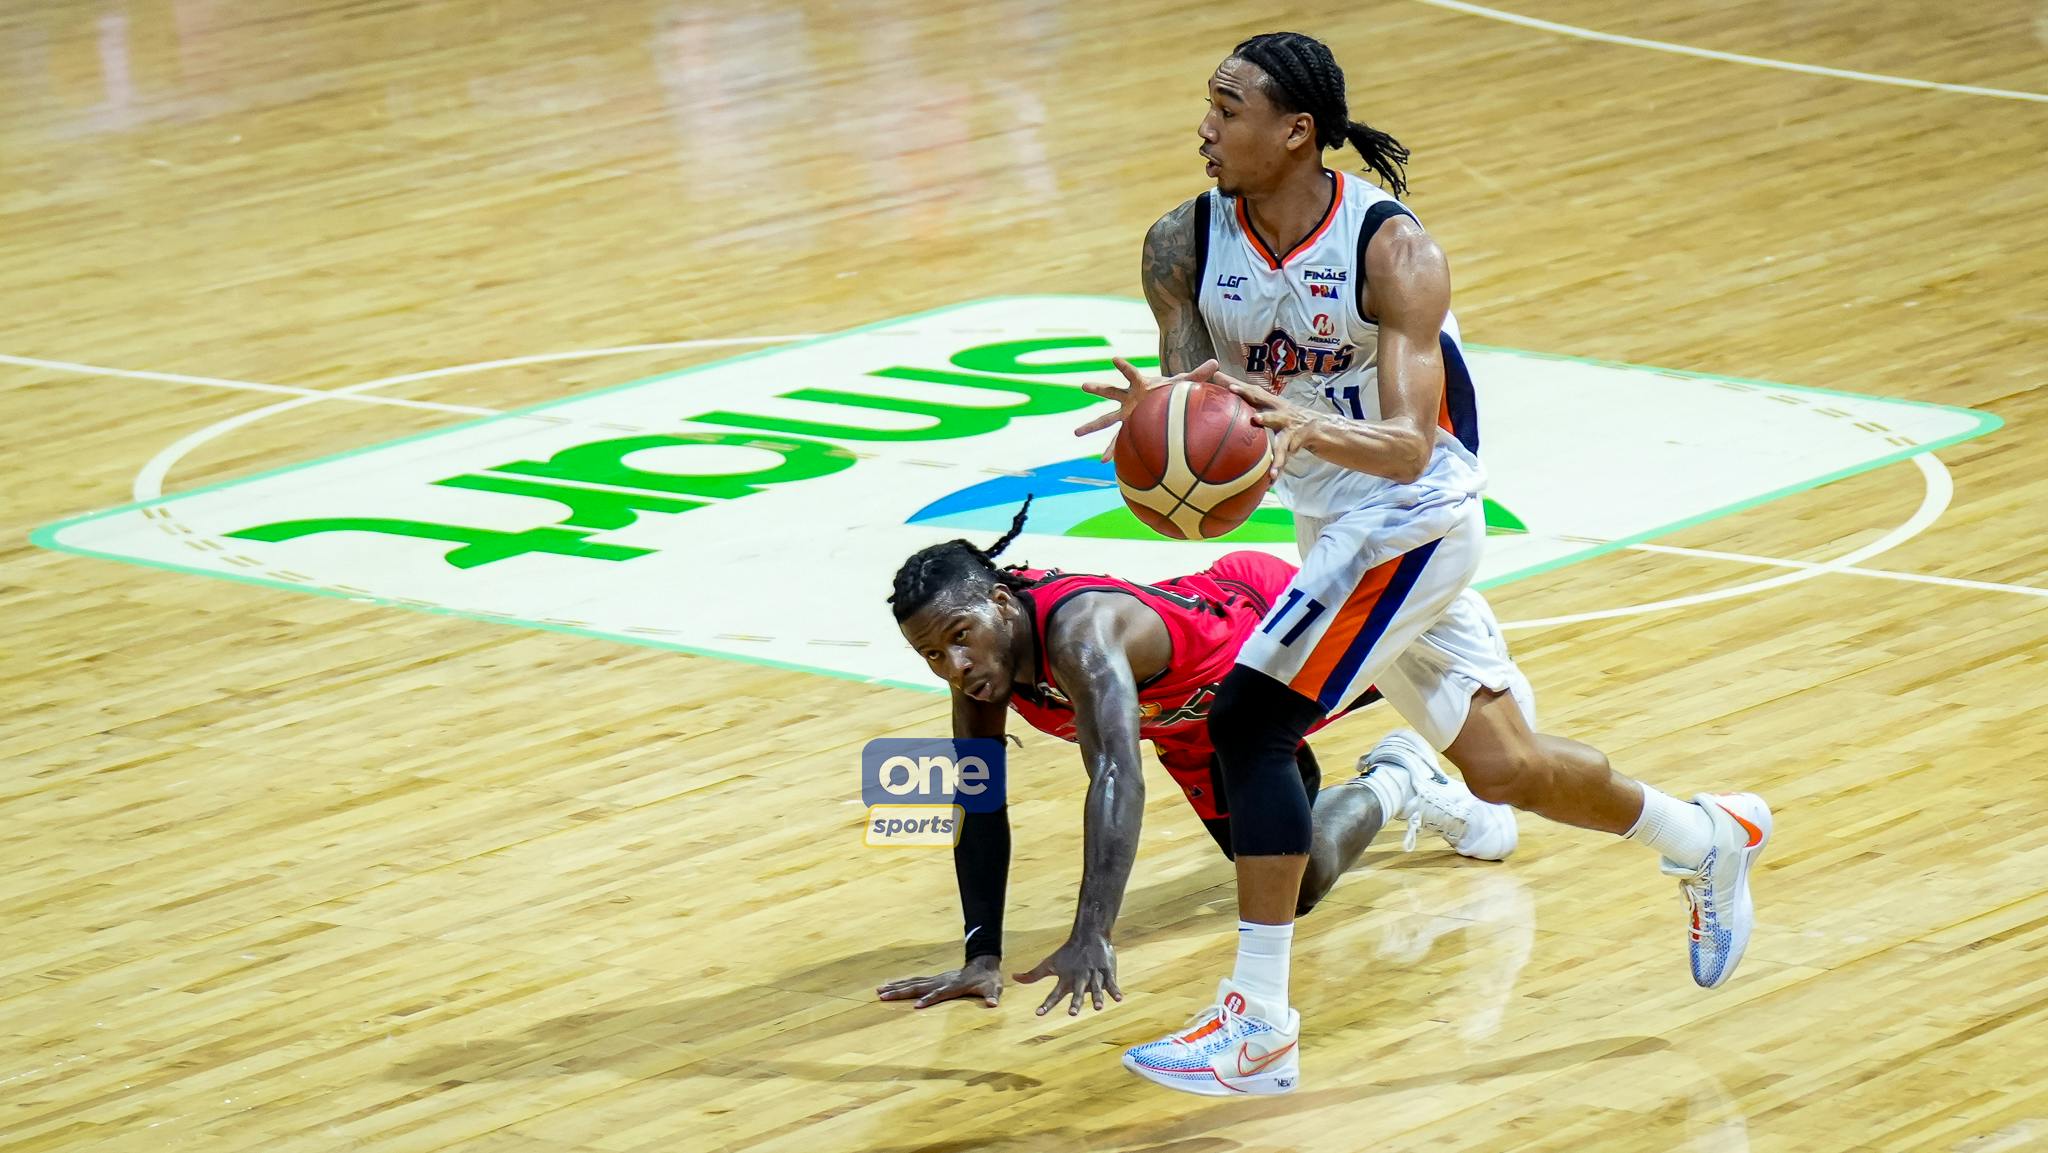 PBA: Chris Newsome comes up clutch as Meralco outlasts San Miguel to seize 2-1 Finals lead